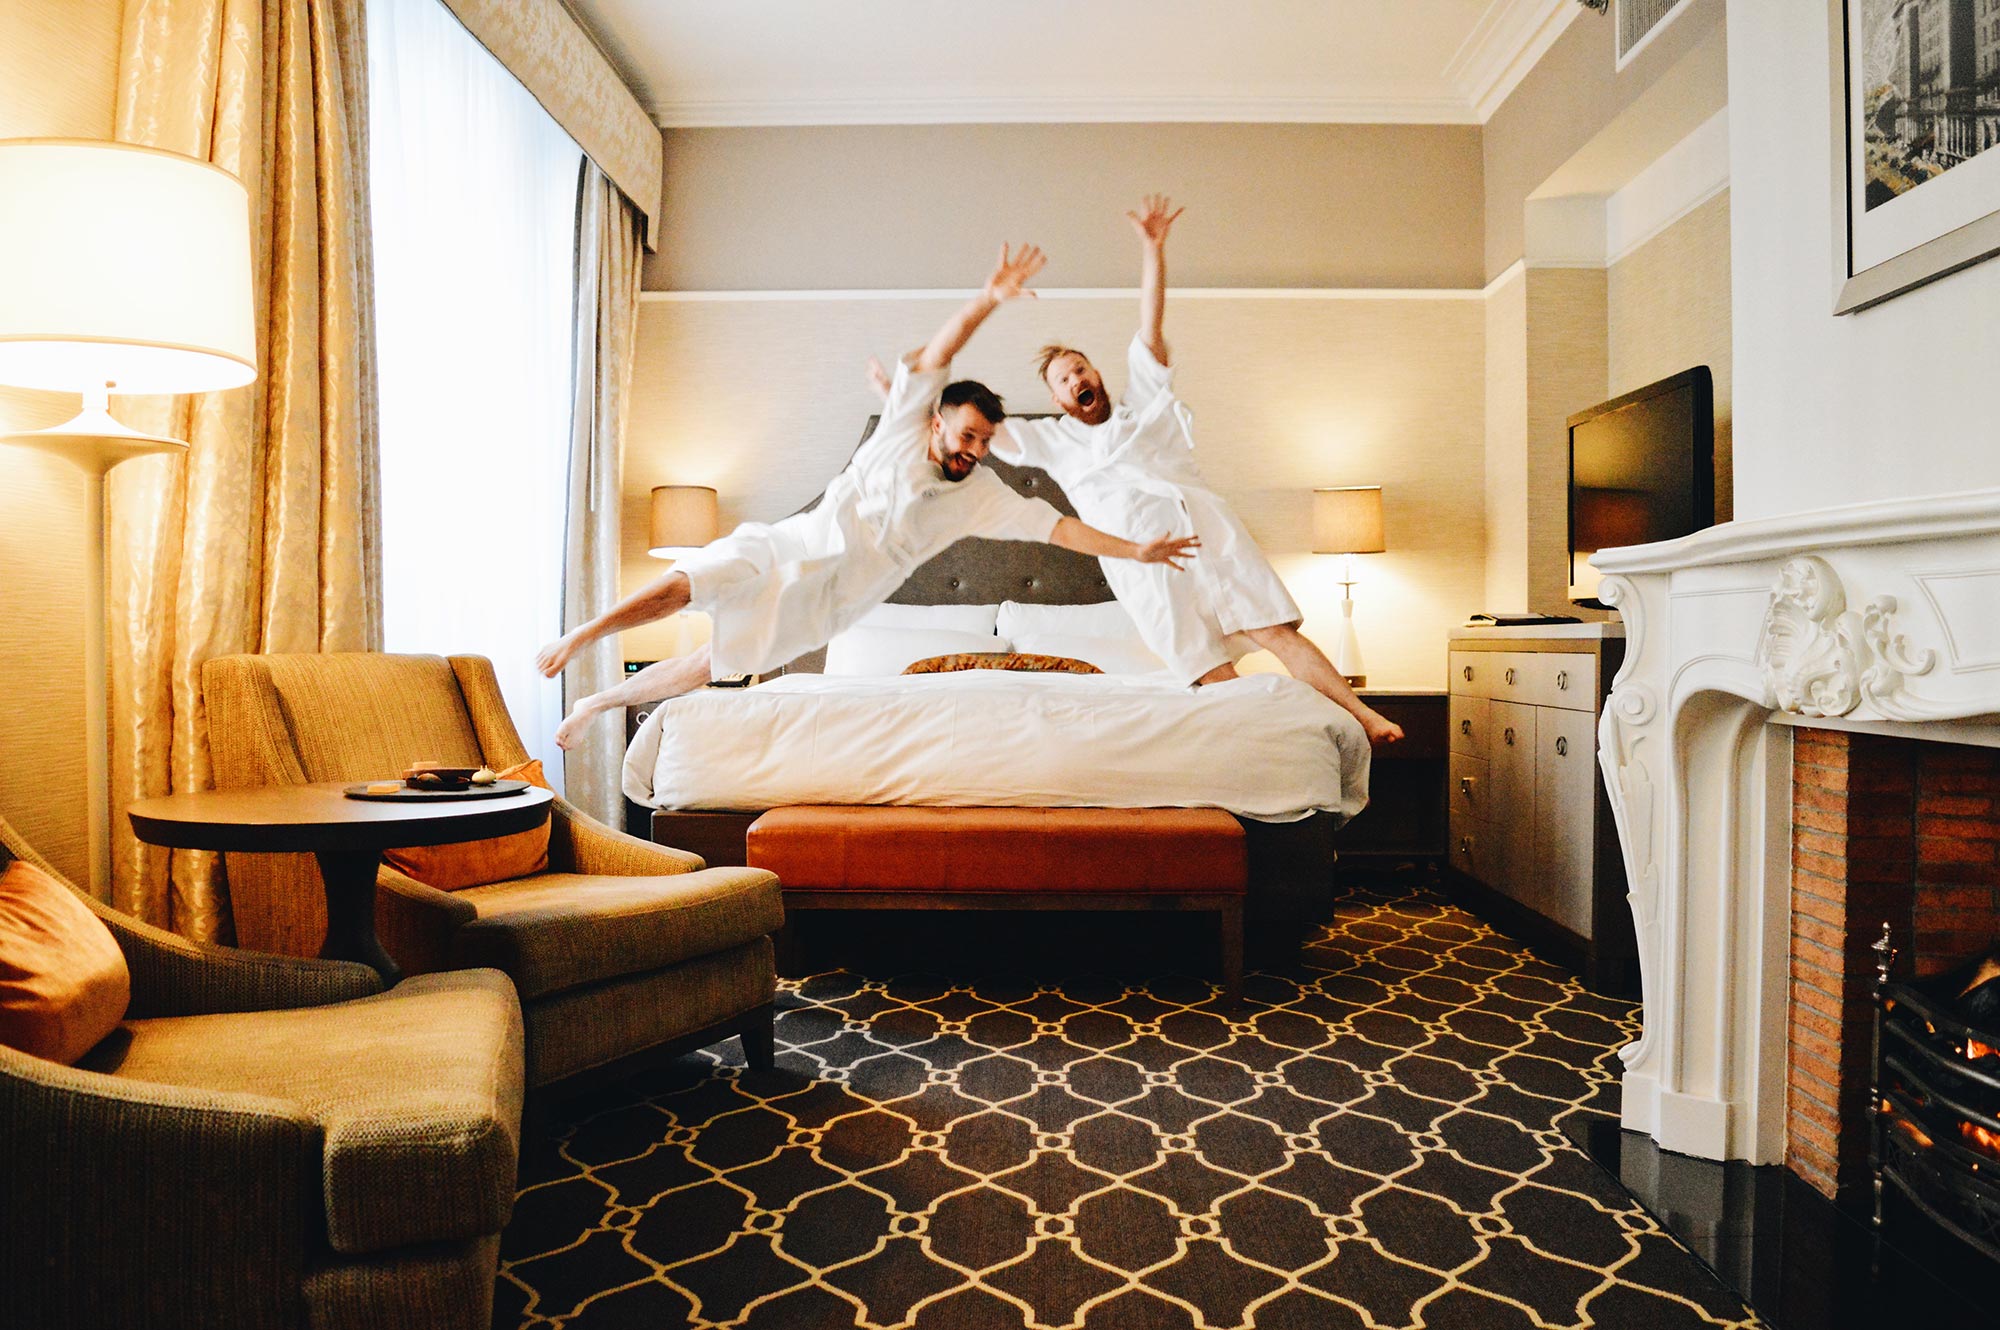 Deluxe Room with Kingsize Bed | Gay-friendly Fairmont Palliser Hotel Downtown Calgary © CoupleofMen.com